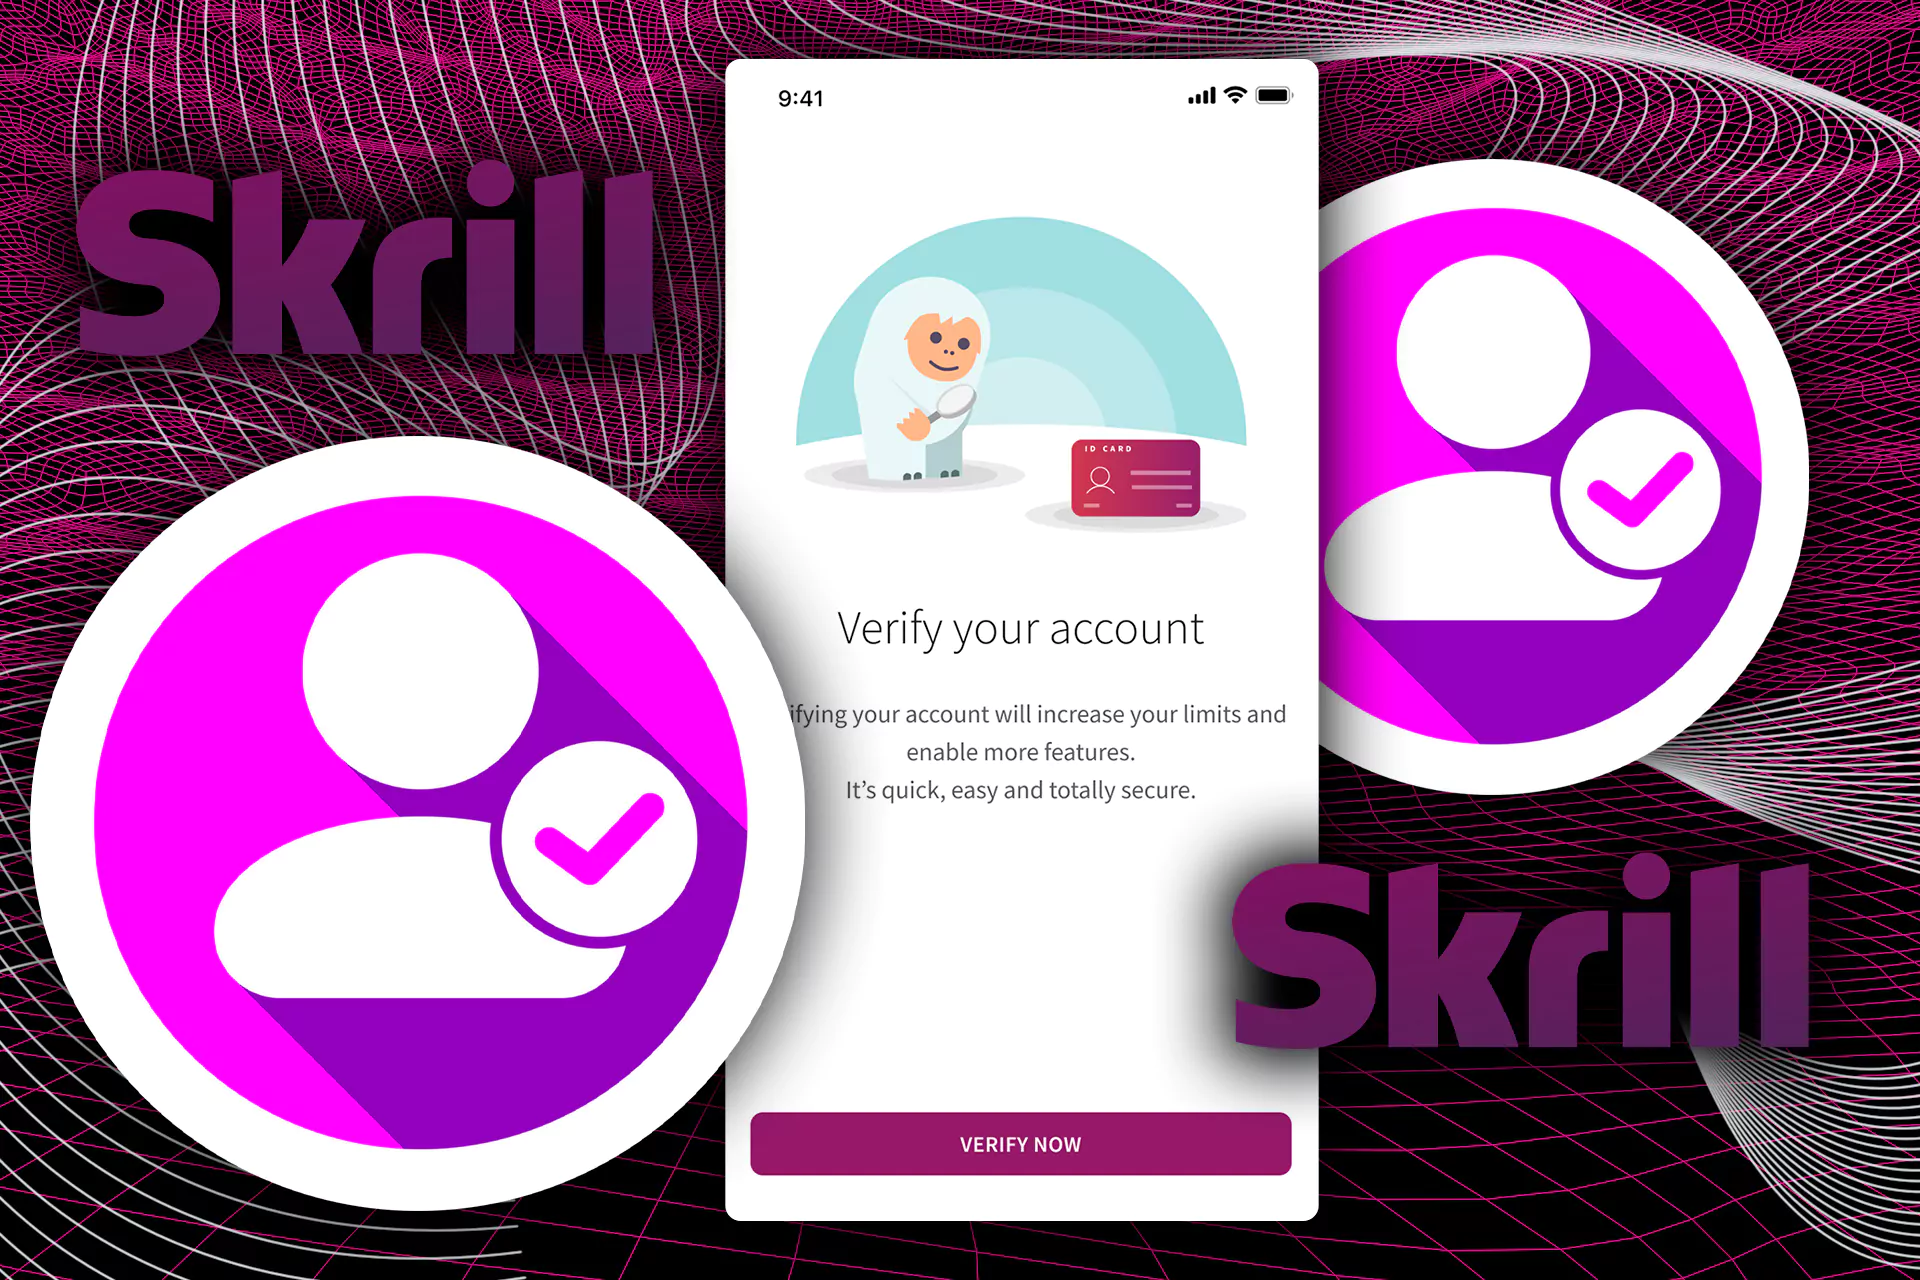 Provide Skrill with your personal information.